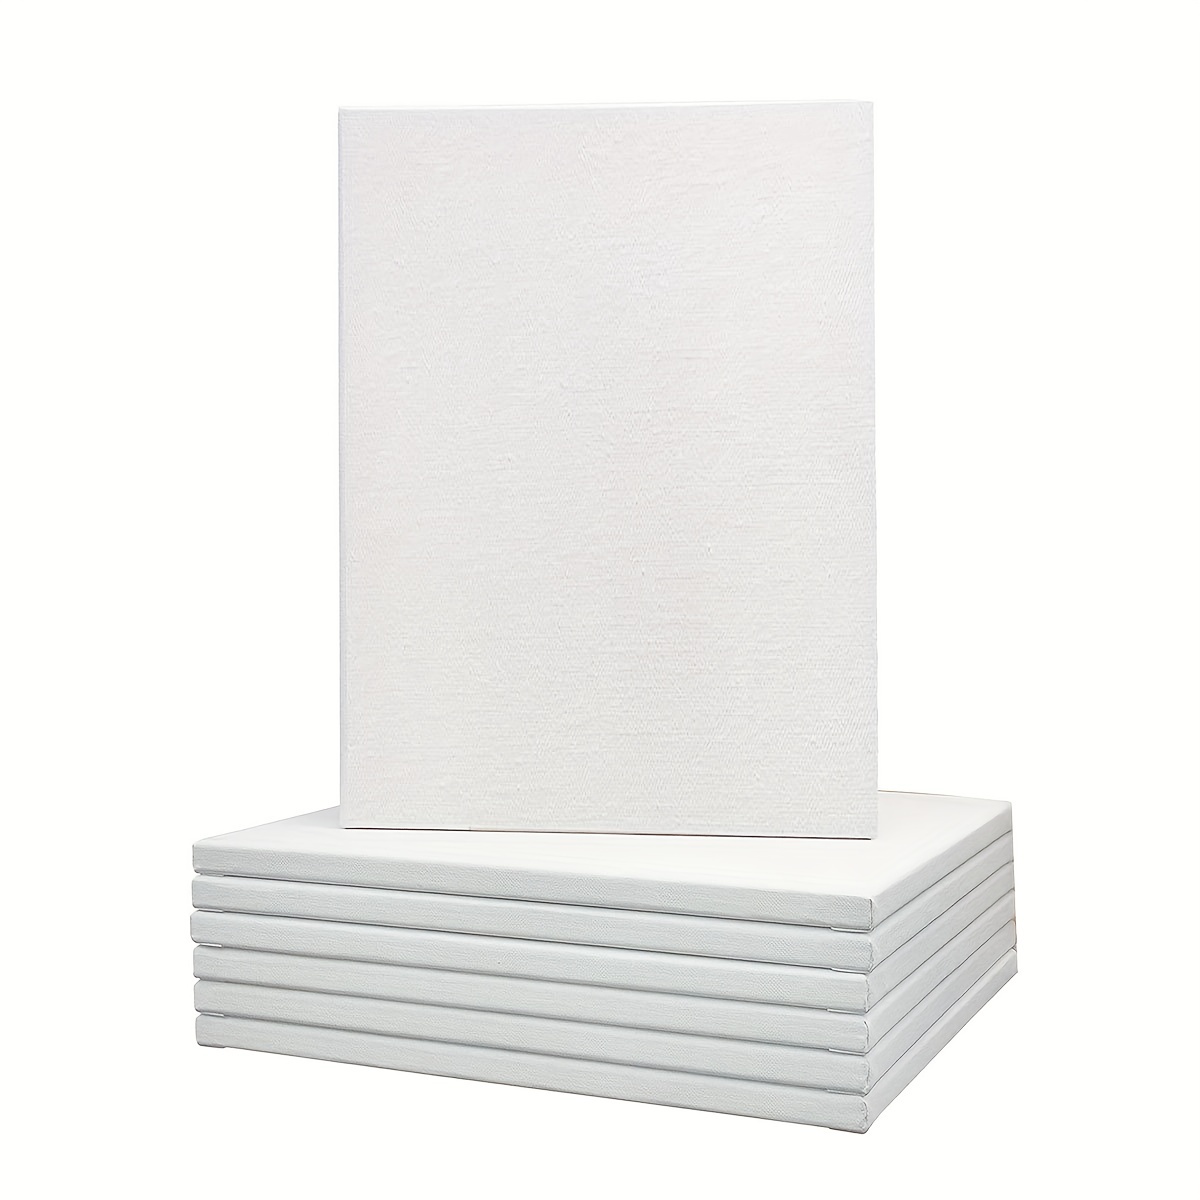 Paint Canvases For Painting, Pack Of 1, 8 X 12 Inches, Acid Free Canvases  For Painting, Art Supplies For Adults And Teens, White Blank Flat Canvas Bo